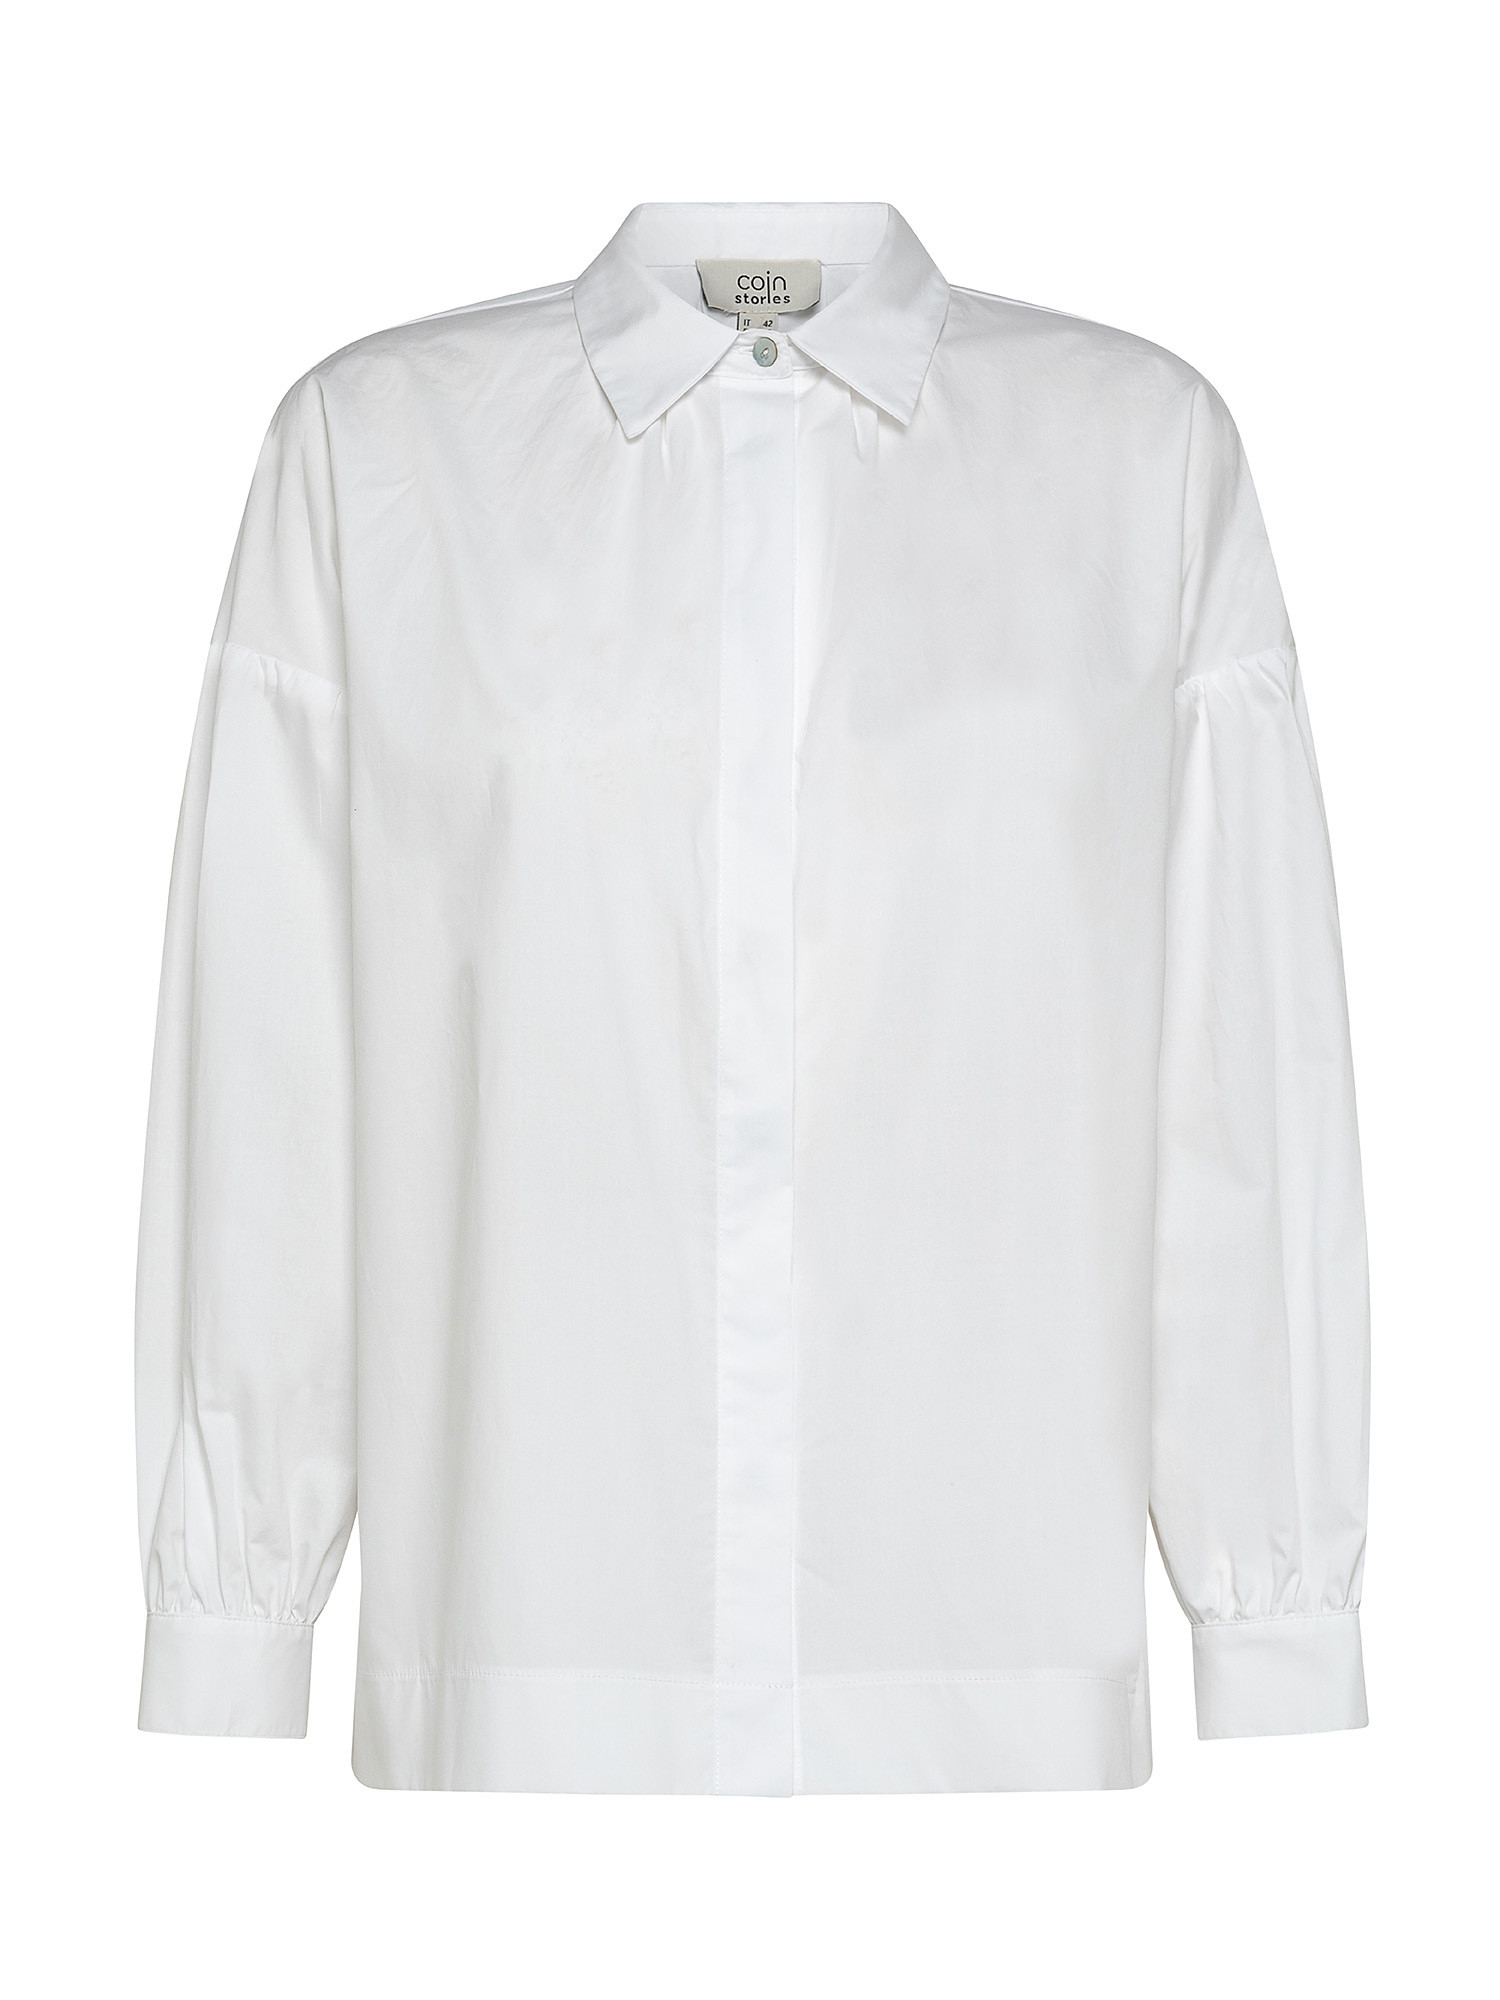 Shirt in popeline, White, large image number 0